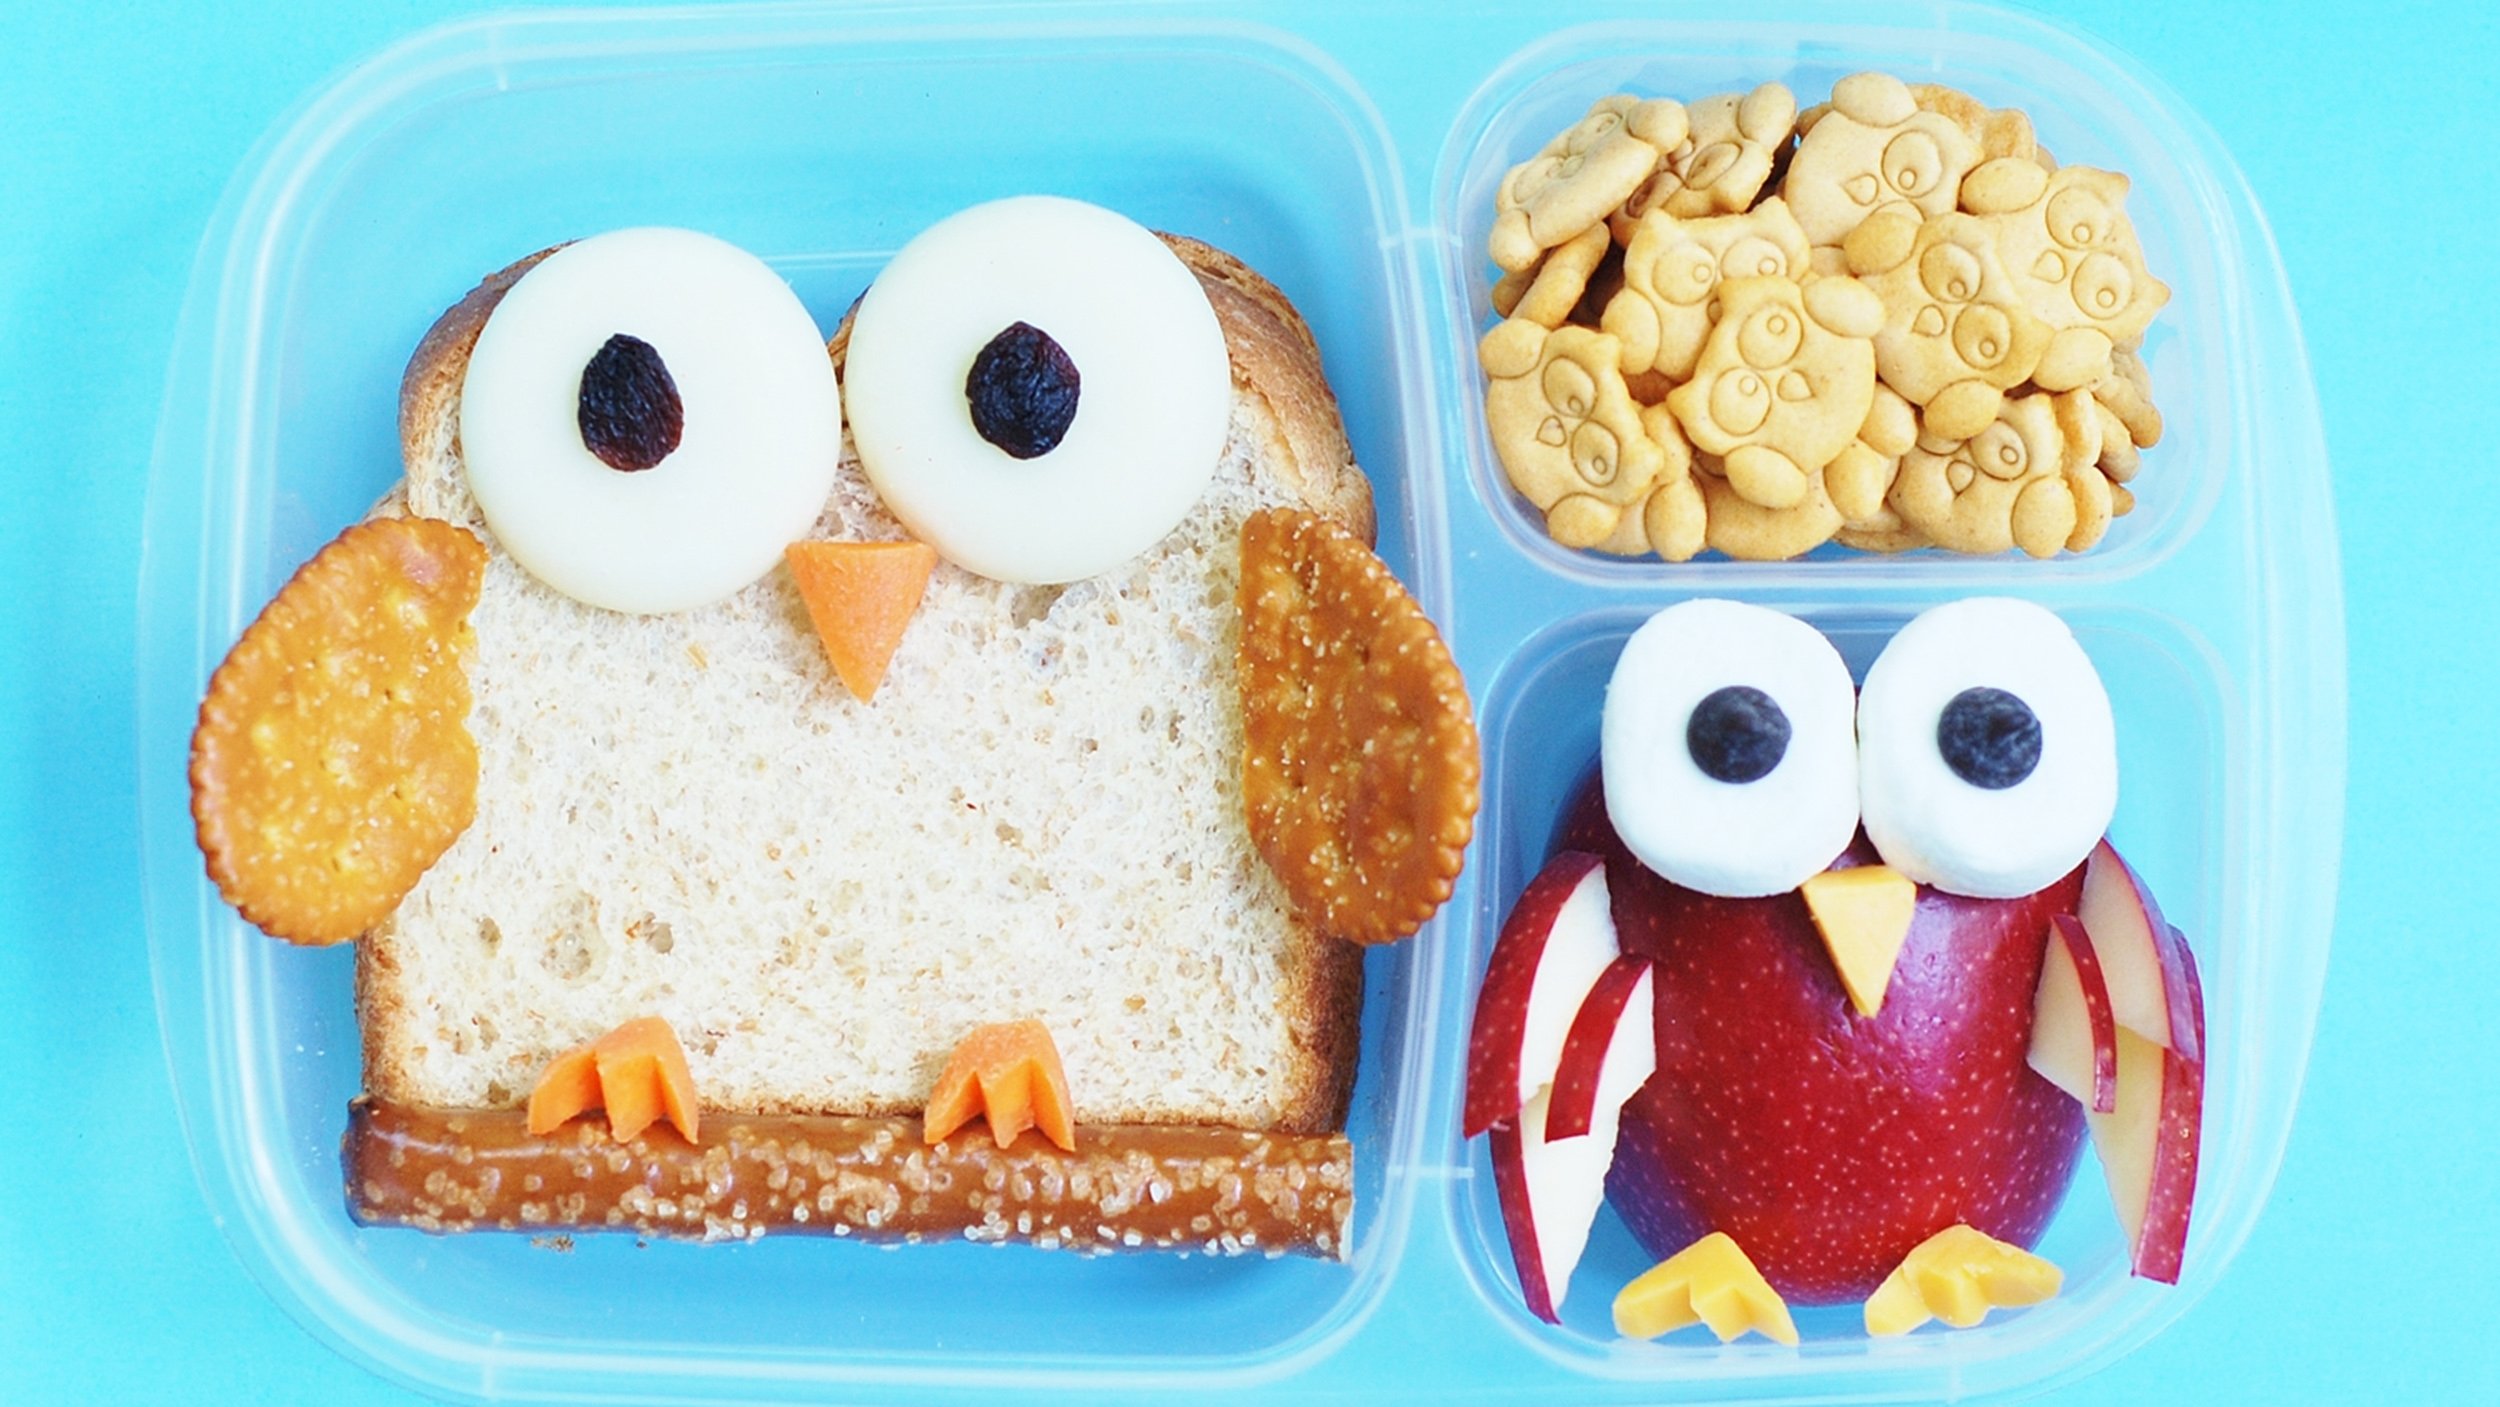 10 Stylish Fun Lunch Ideas For Toddlers 5 cute and creative bento box lunch ideas for kids today 1 2022